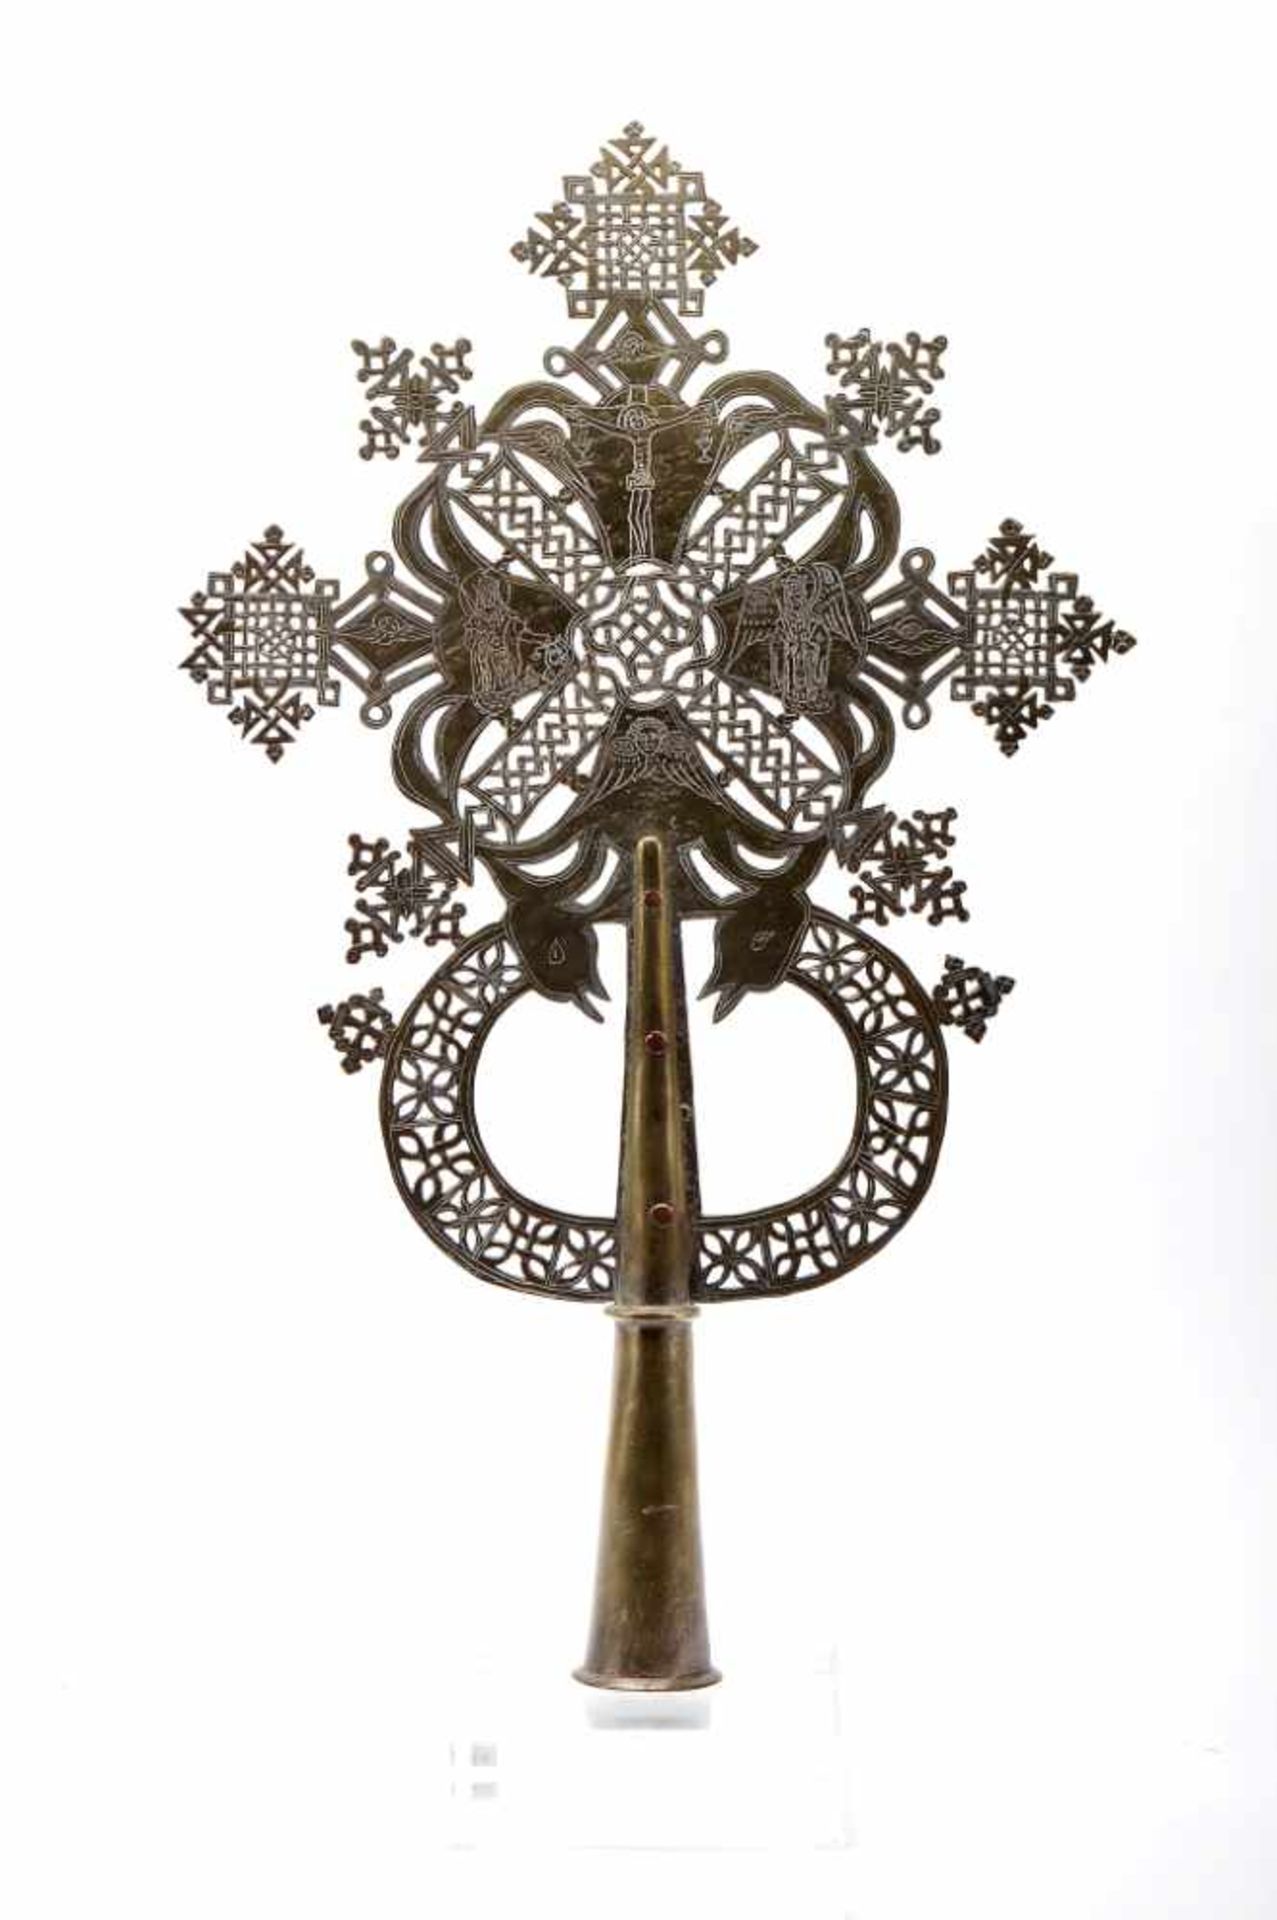 A Procession CrossA Procession Cross, scalloped, pierced and engraved brass "Crucified Christ, Saint